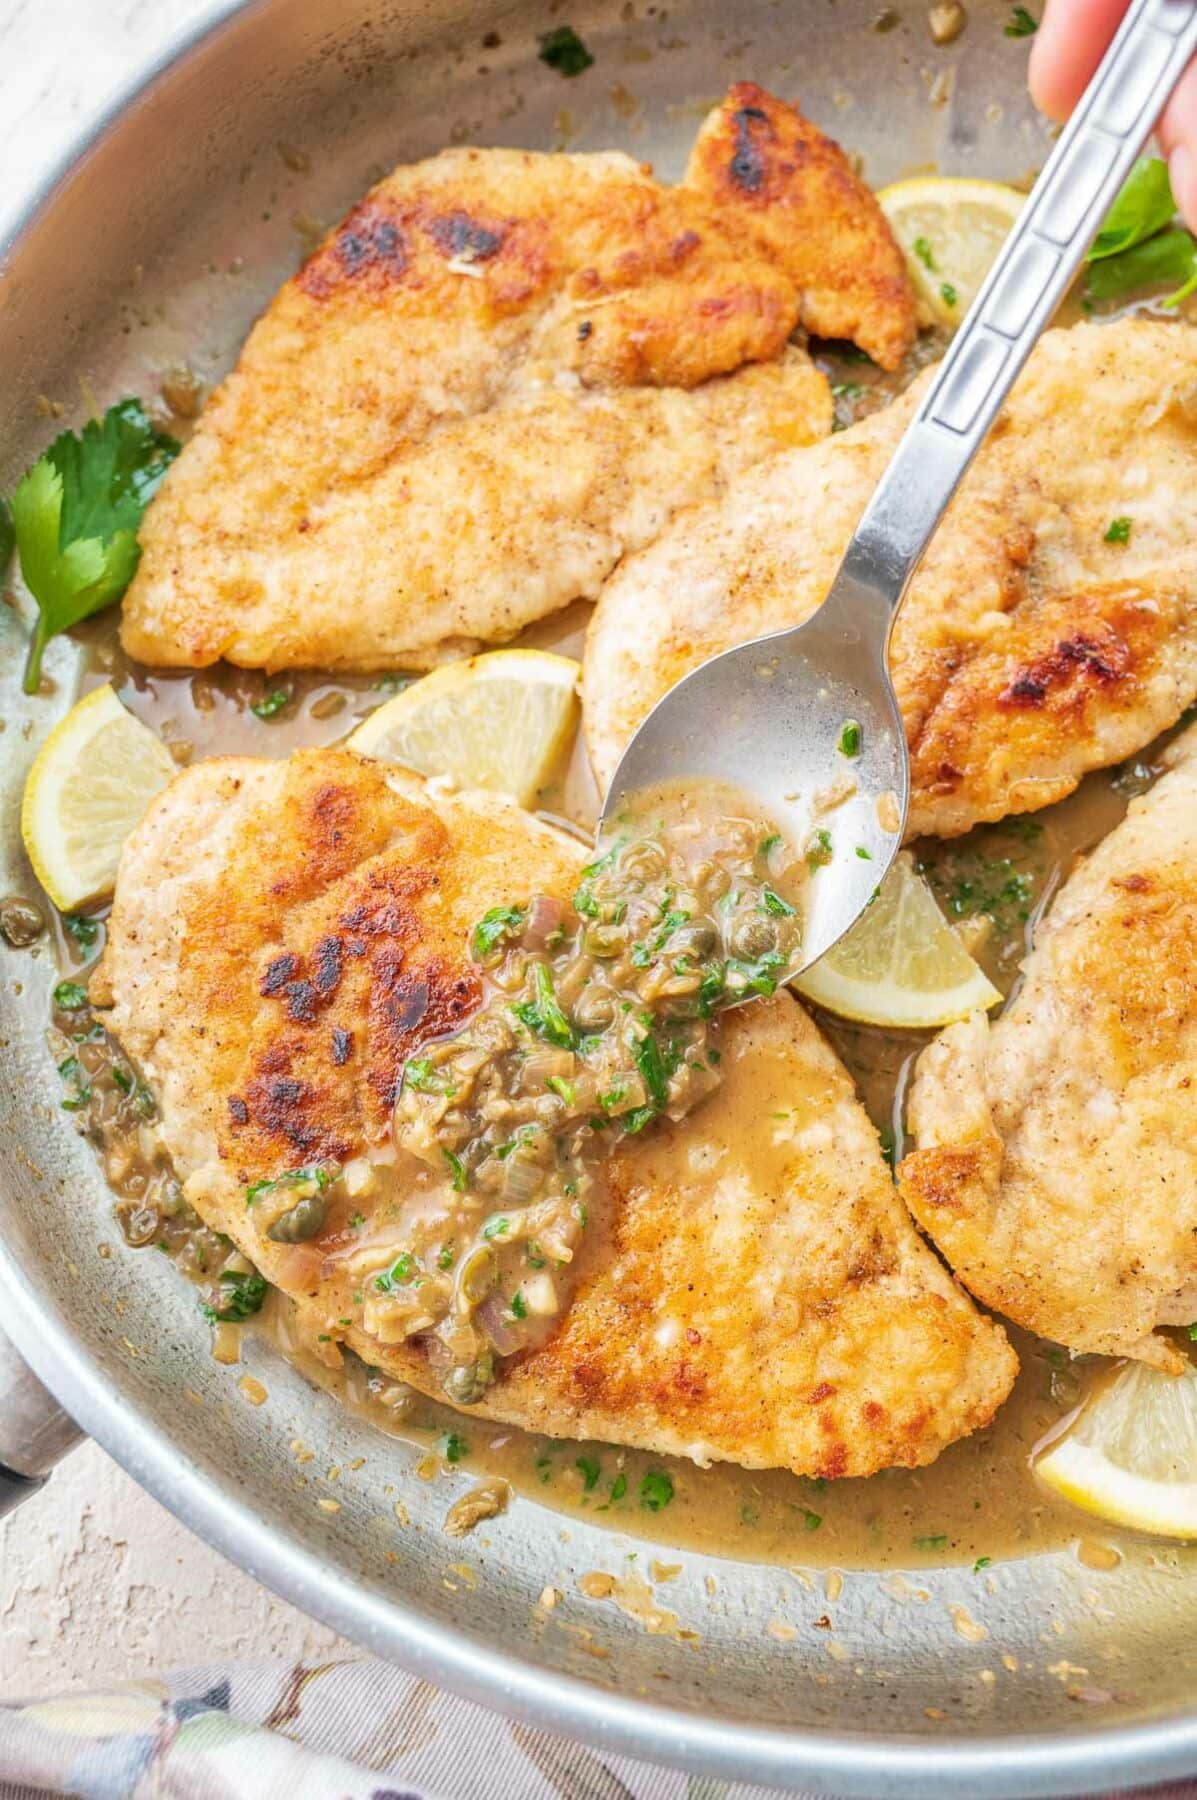 Pan-fried chicken piccata in a frying pan in poured with pan sauce.